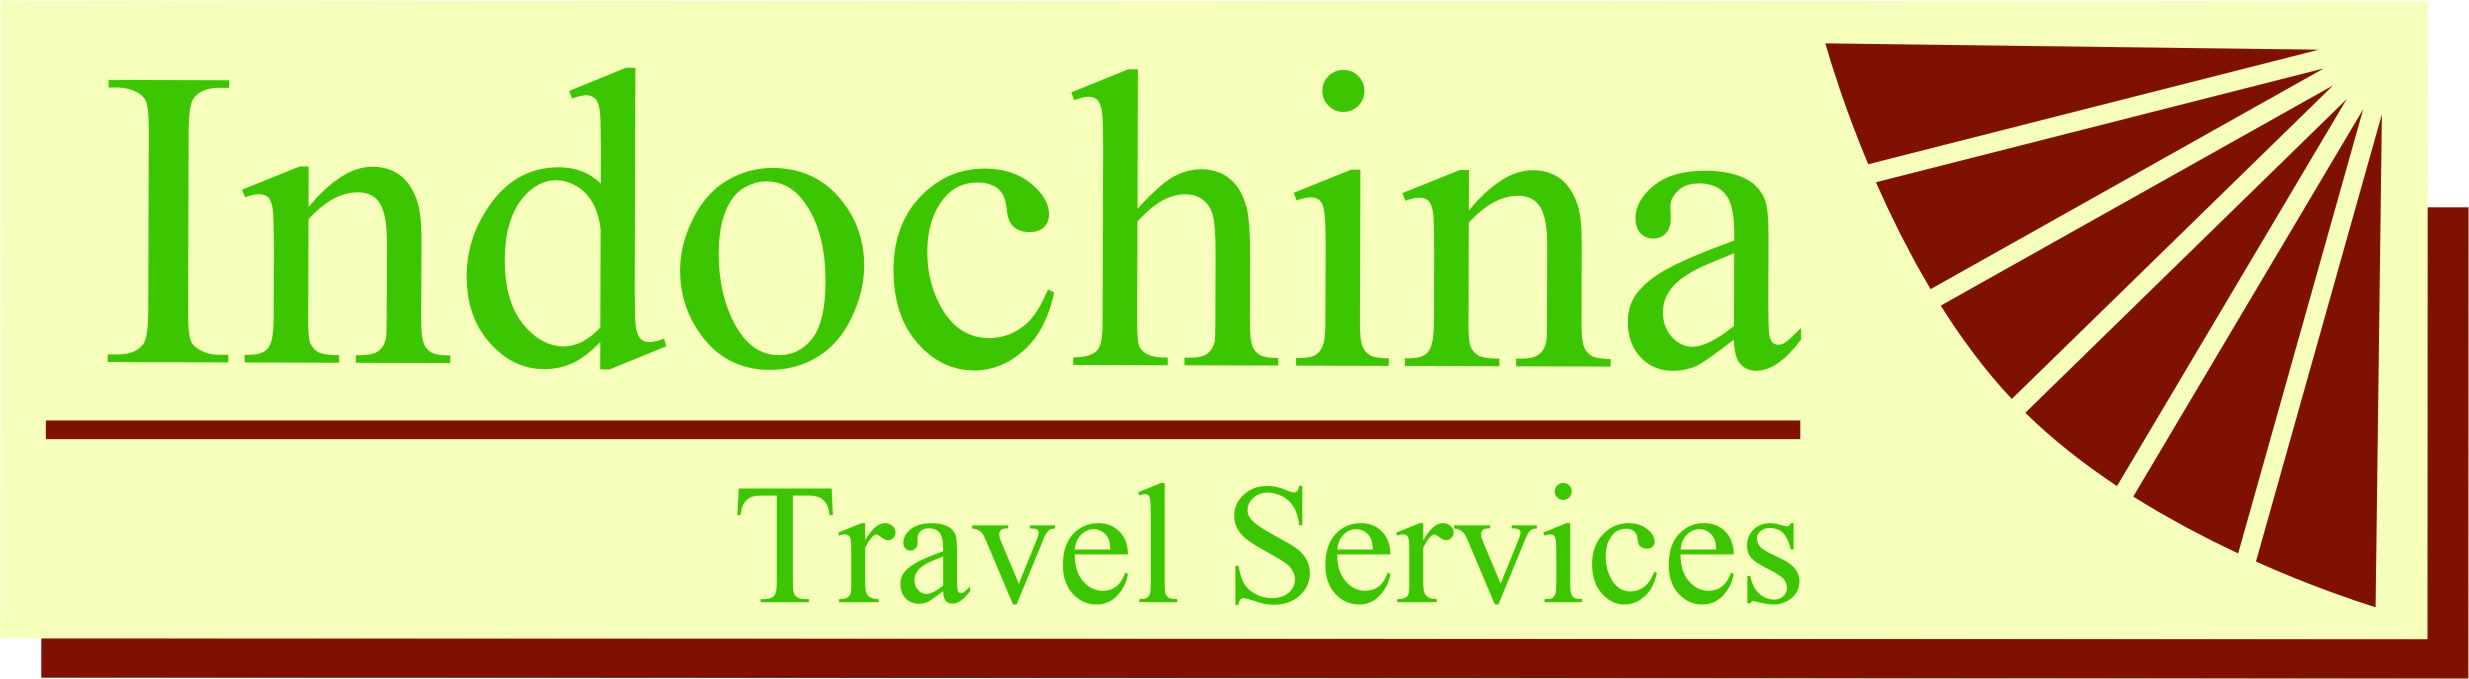 Photos Indochina Travel Services 1 - Indochina Travel Services